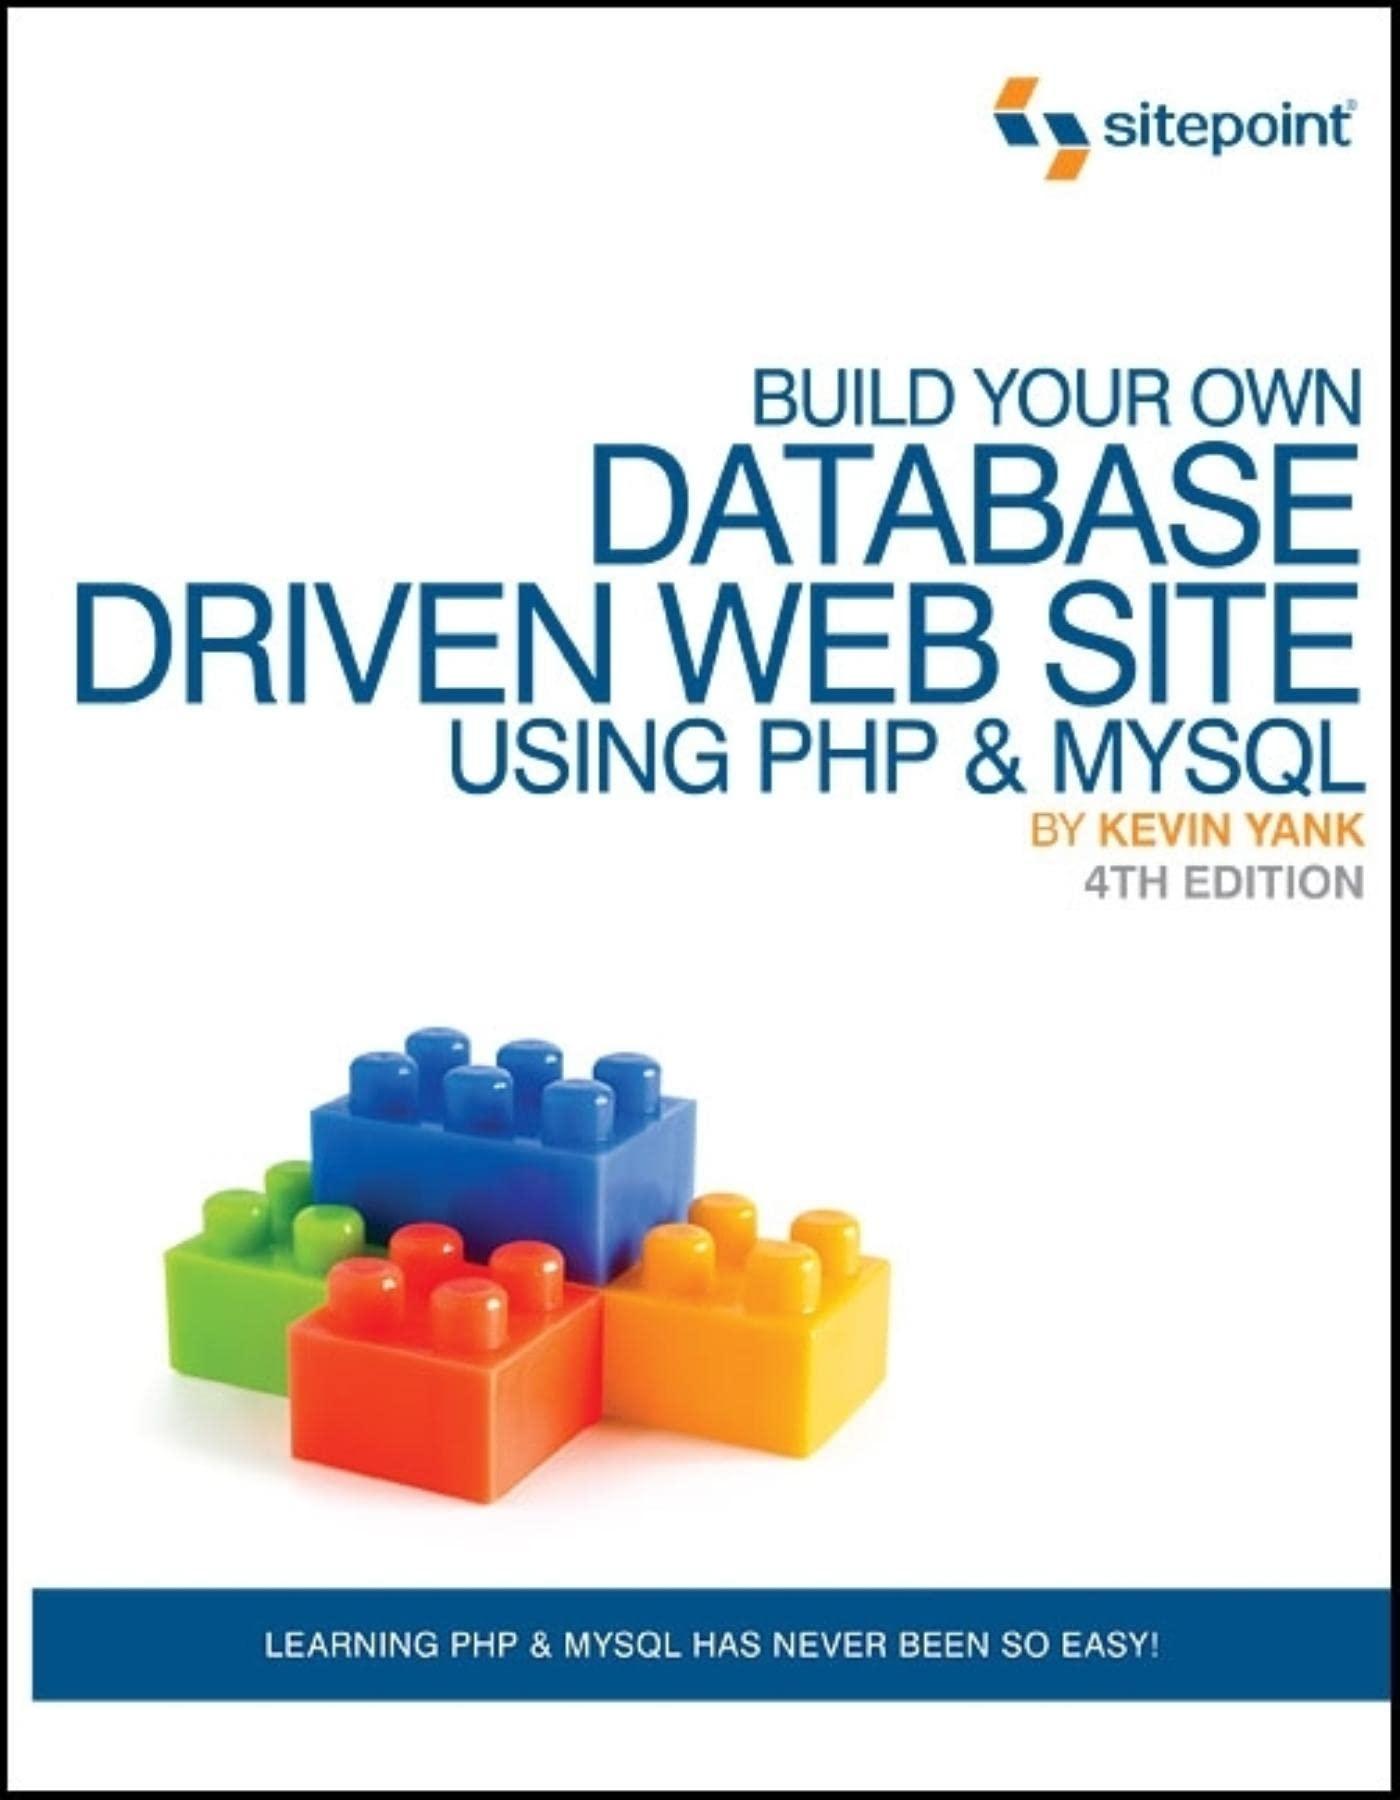 build your own database driven web site using php and mysql 4th edition kevin yank 0980576814, 978-0980576818